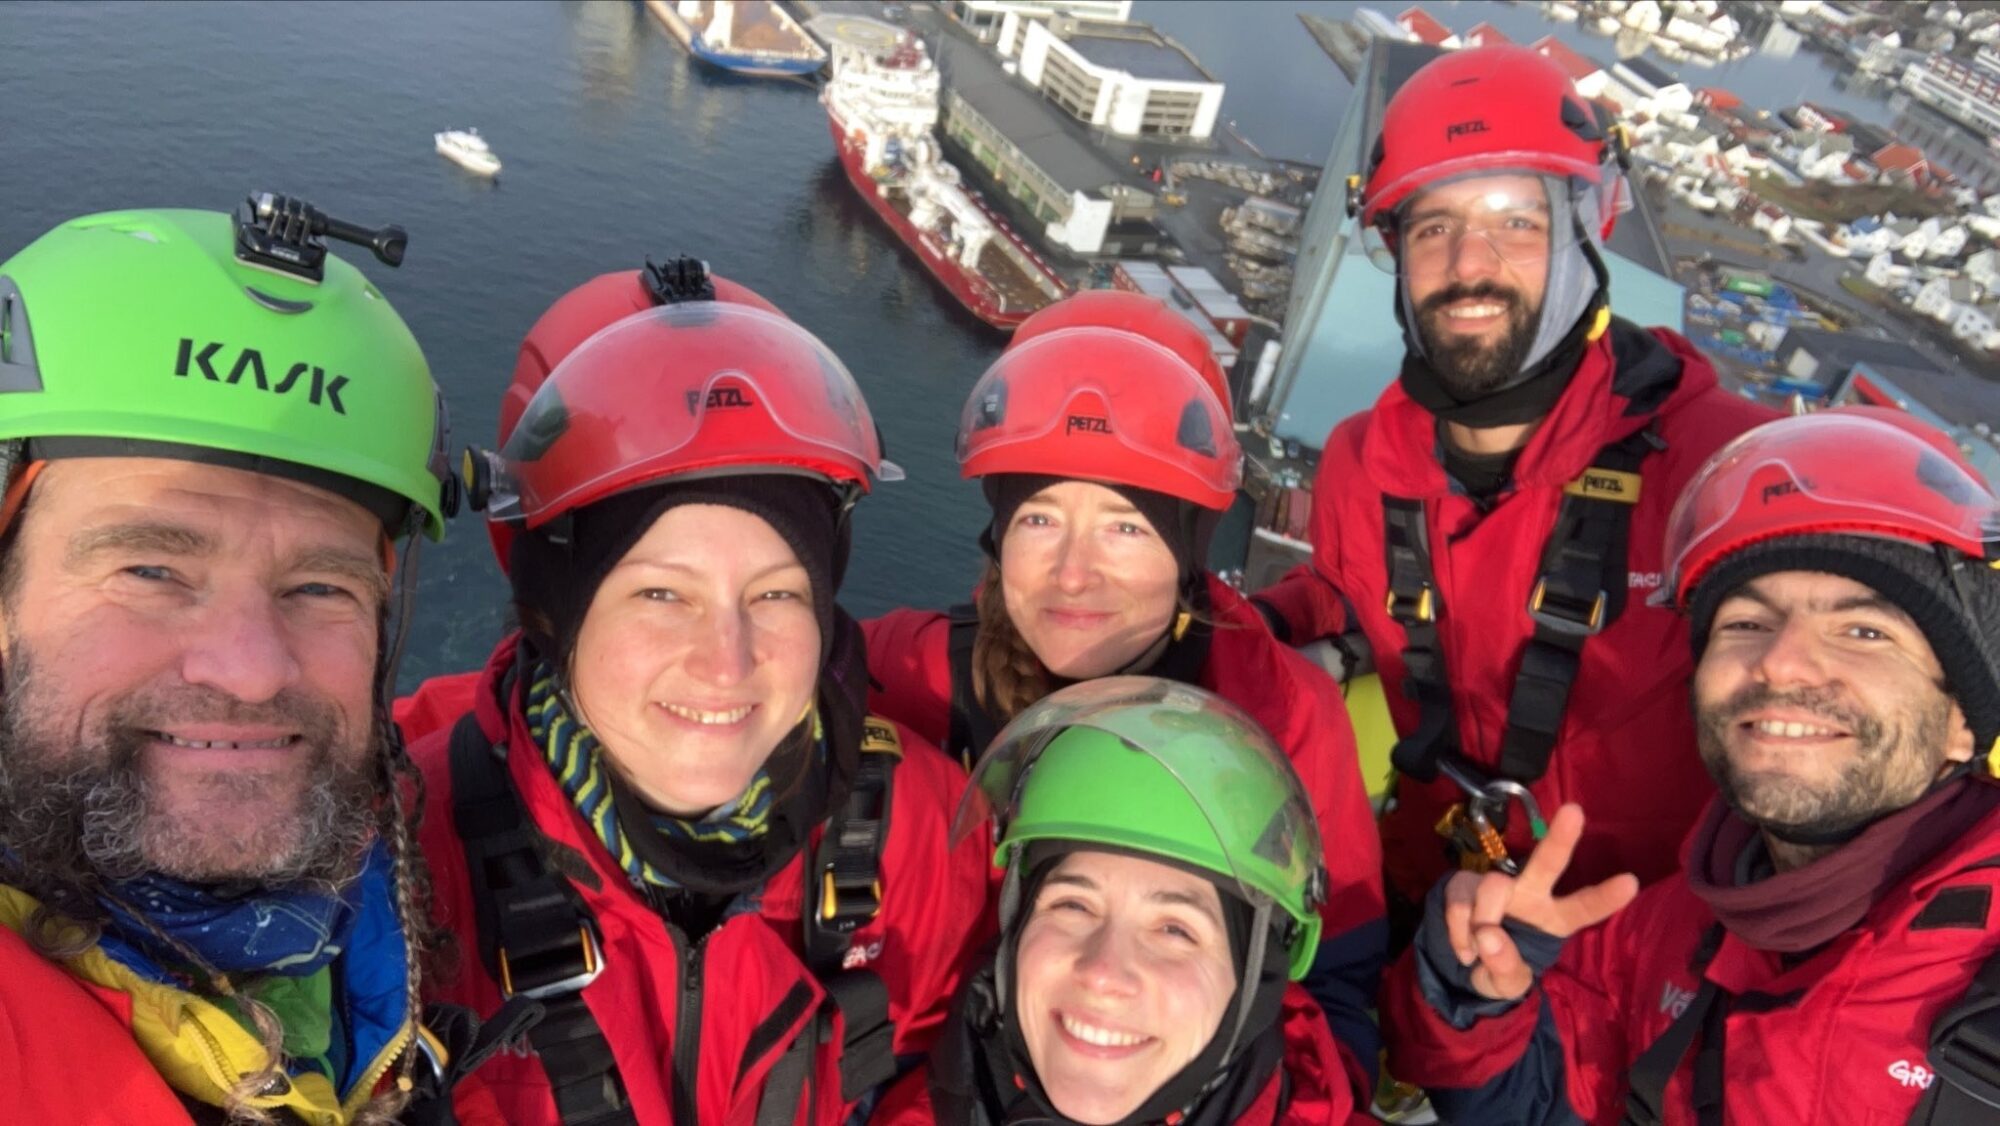 Activists in climbing helmets and red overalls smile for a selfie. Far below in the background, a port city can be seen.